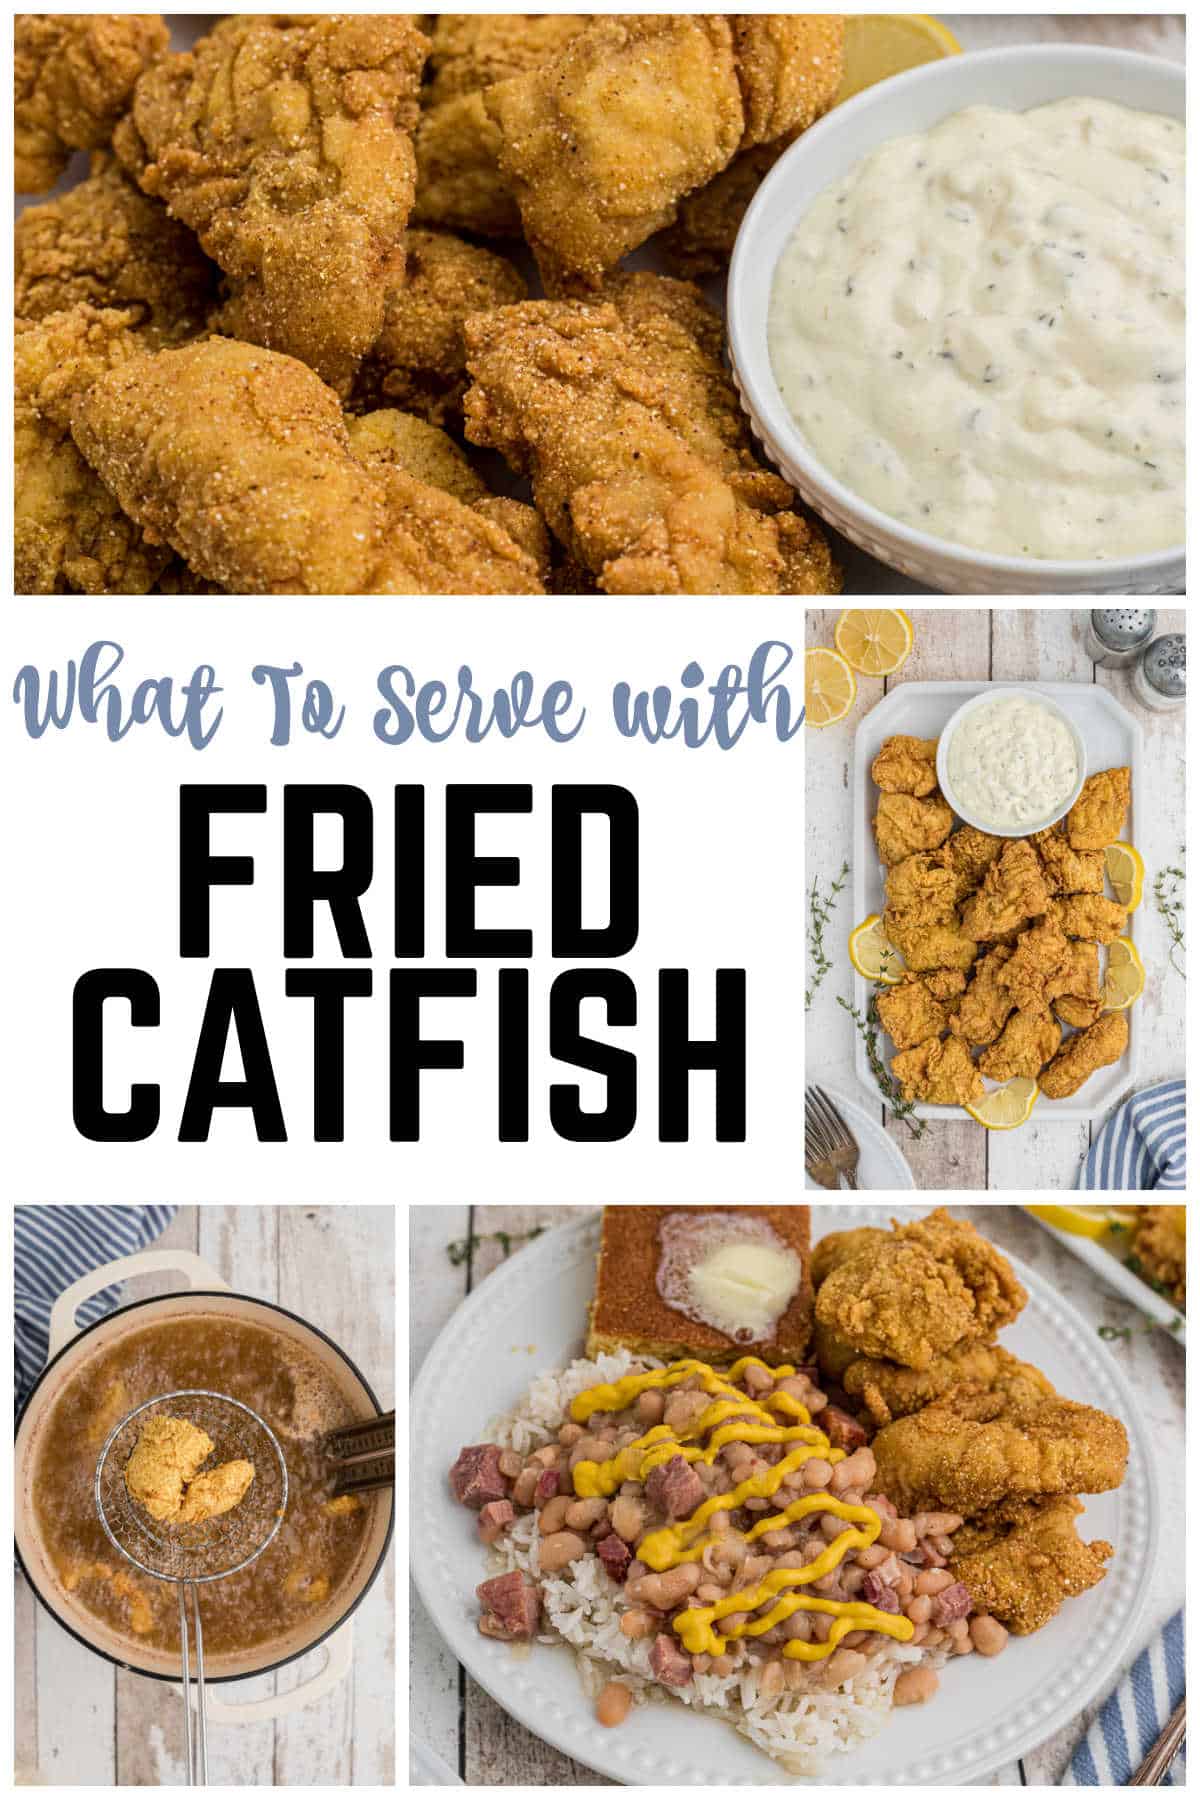 A collage of four images of fried catfish with a text overlay title.